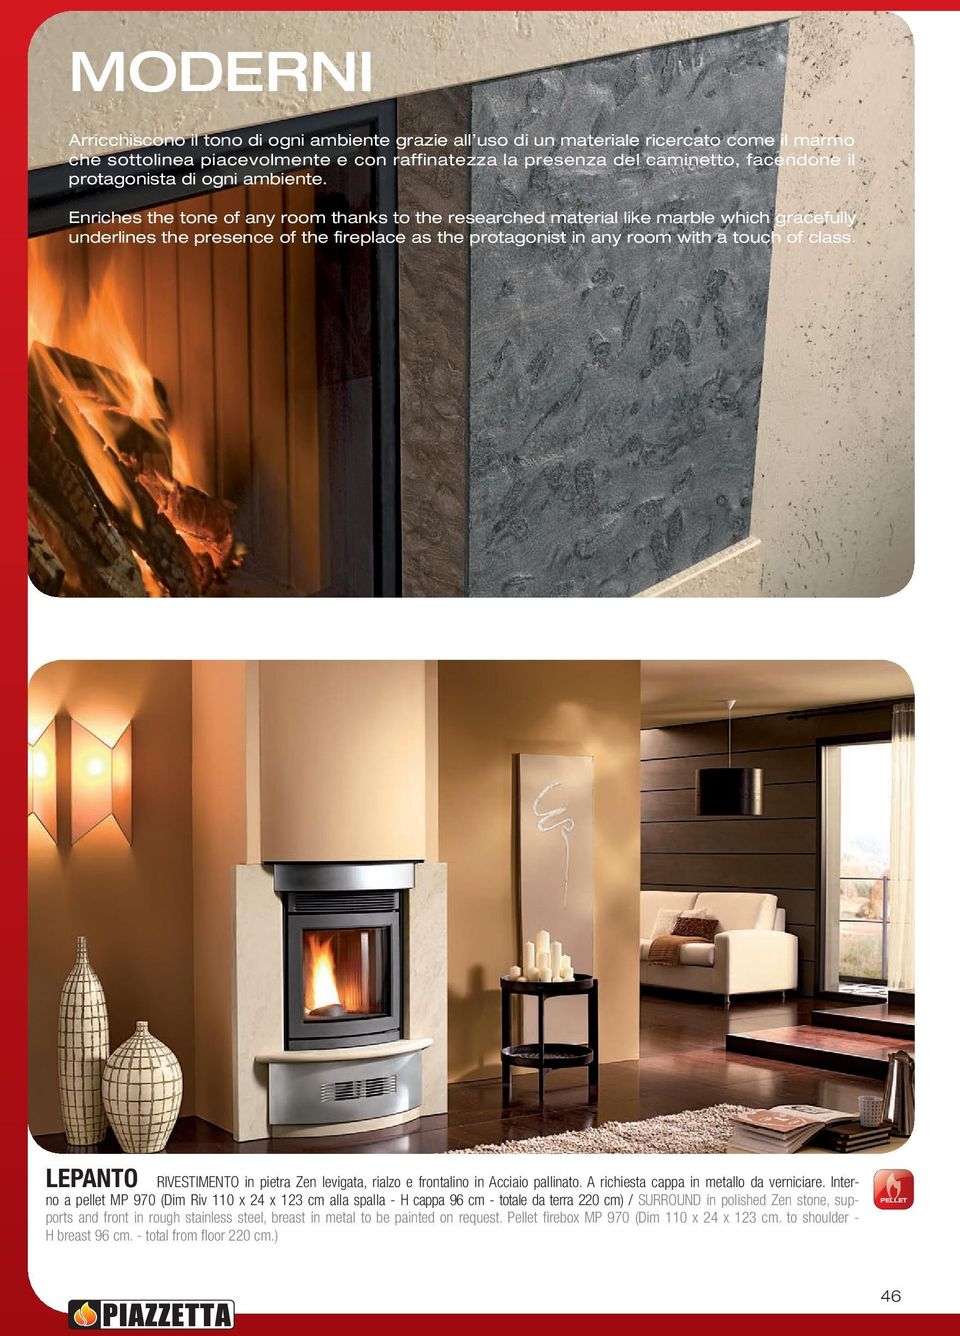 Enriches the tone of any room thanks to the researched material like marble which gracefully underlines the presence of the fireplace as the protagonist in any room with a touch of class.